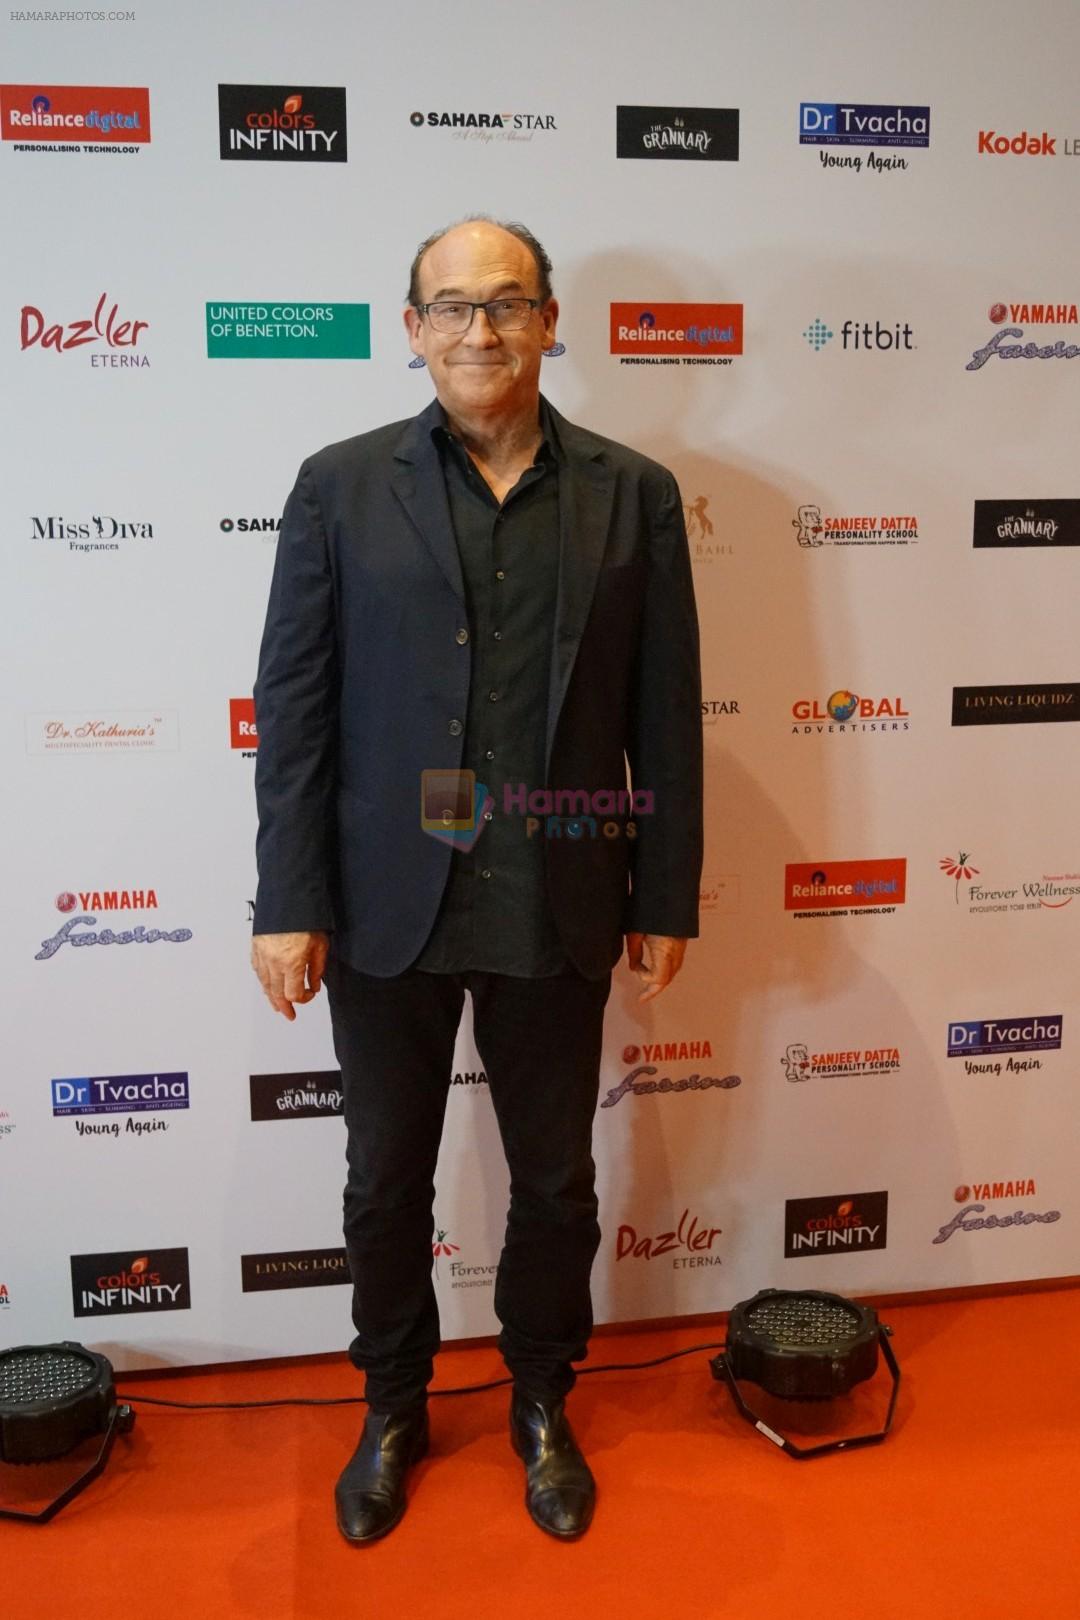 at the Red Carpet Of Miss Diva Grand Finale on 11th Oct 2017